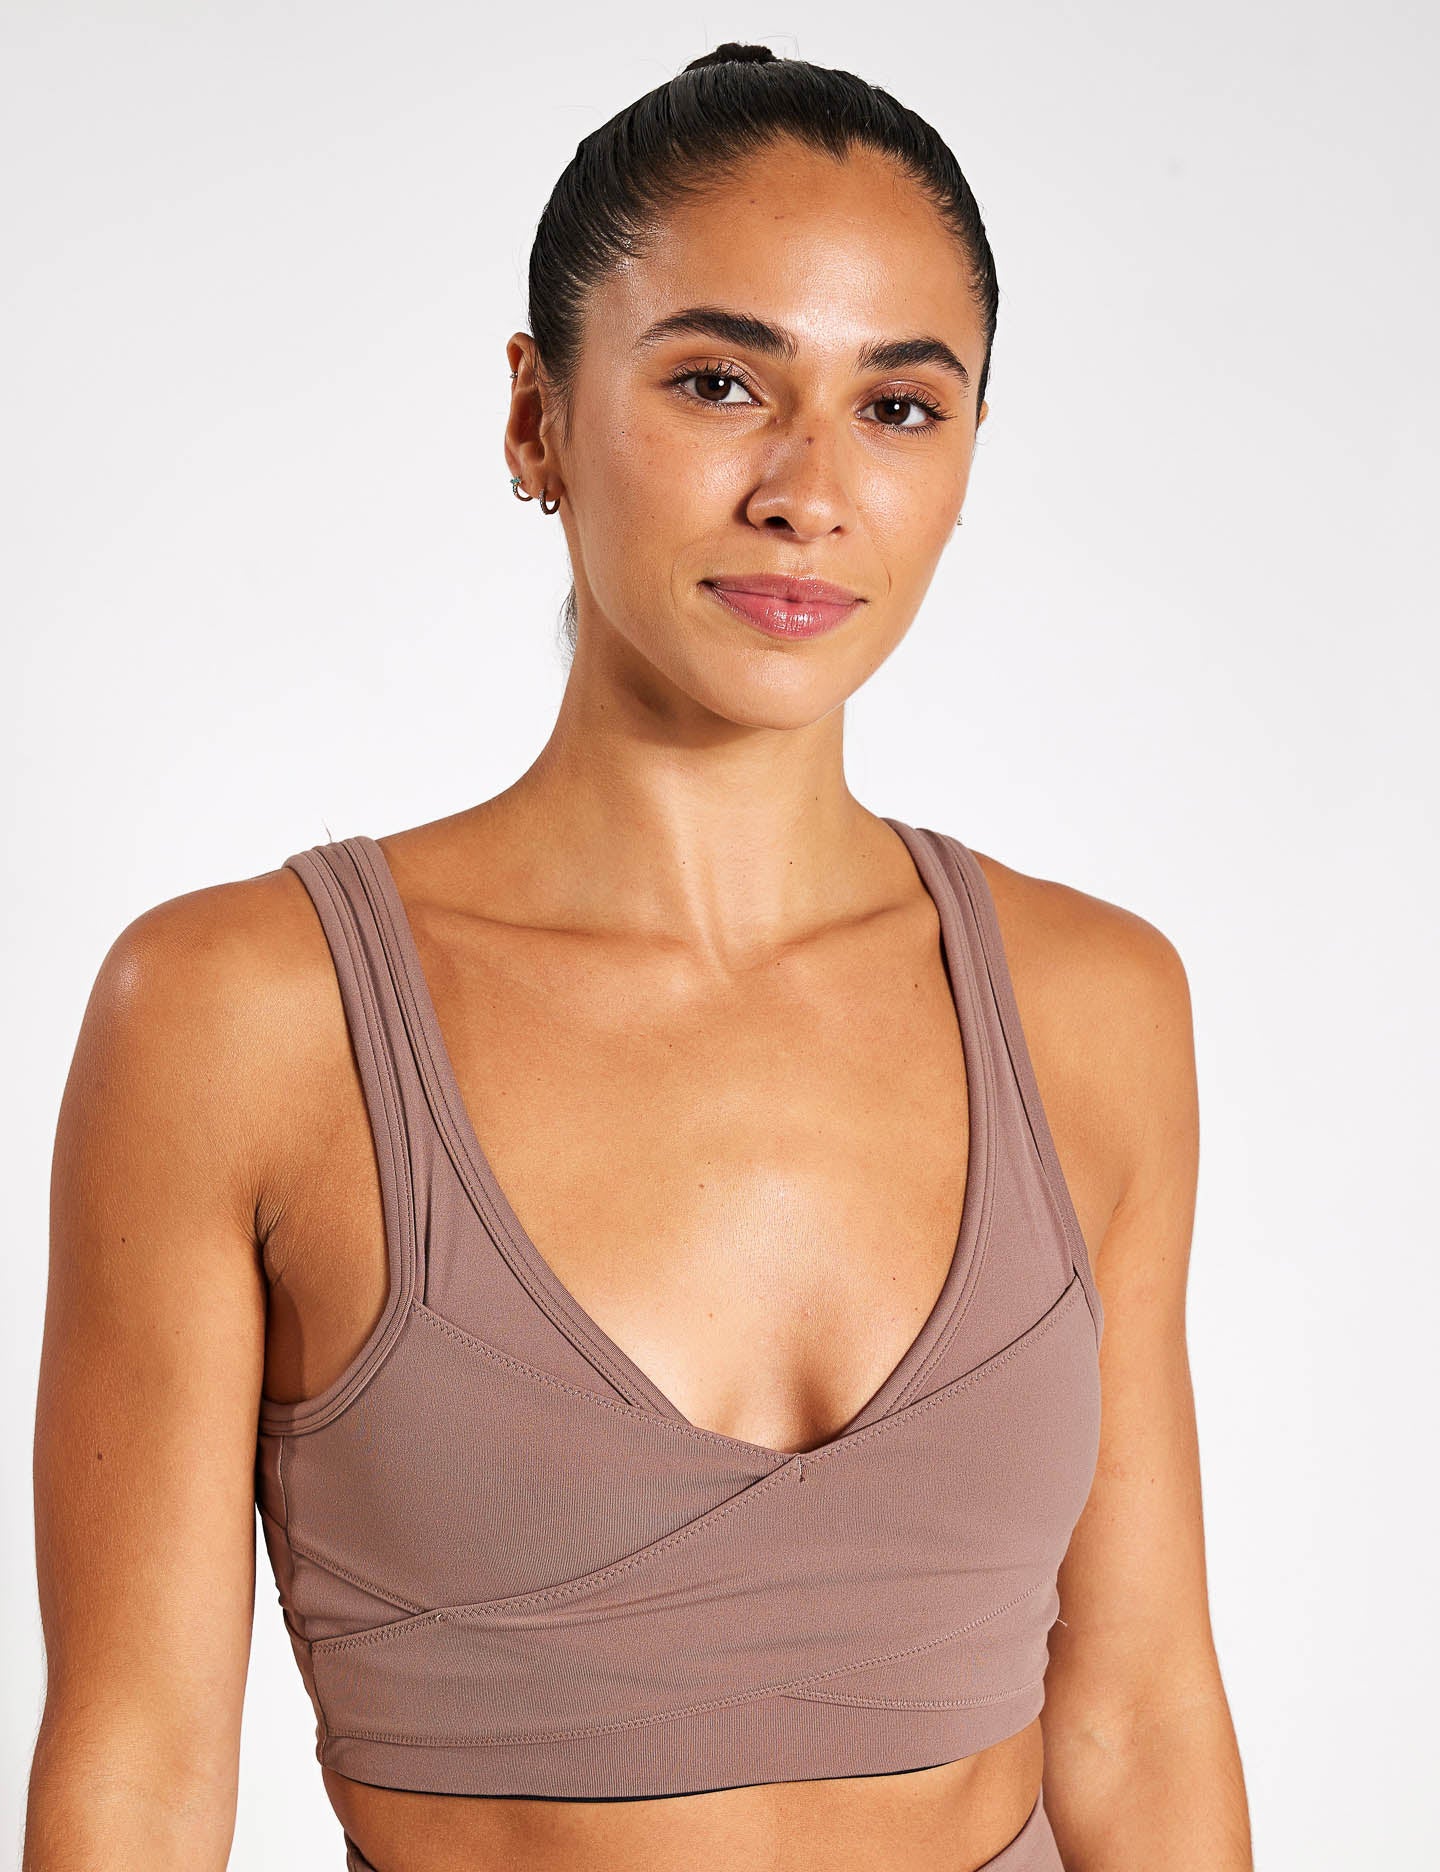 lululemon In Alignment Bra size 6, CD cup